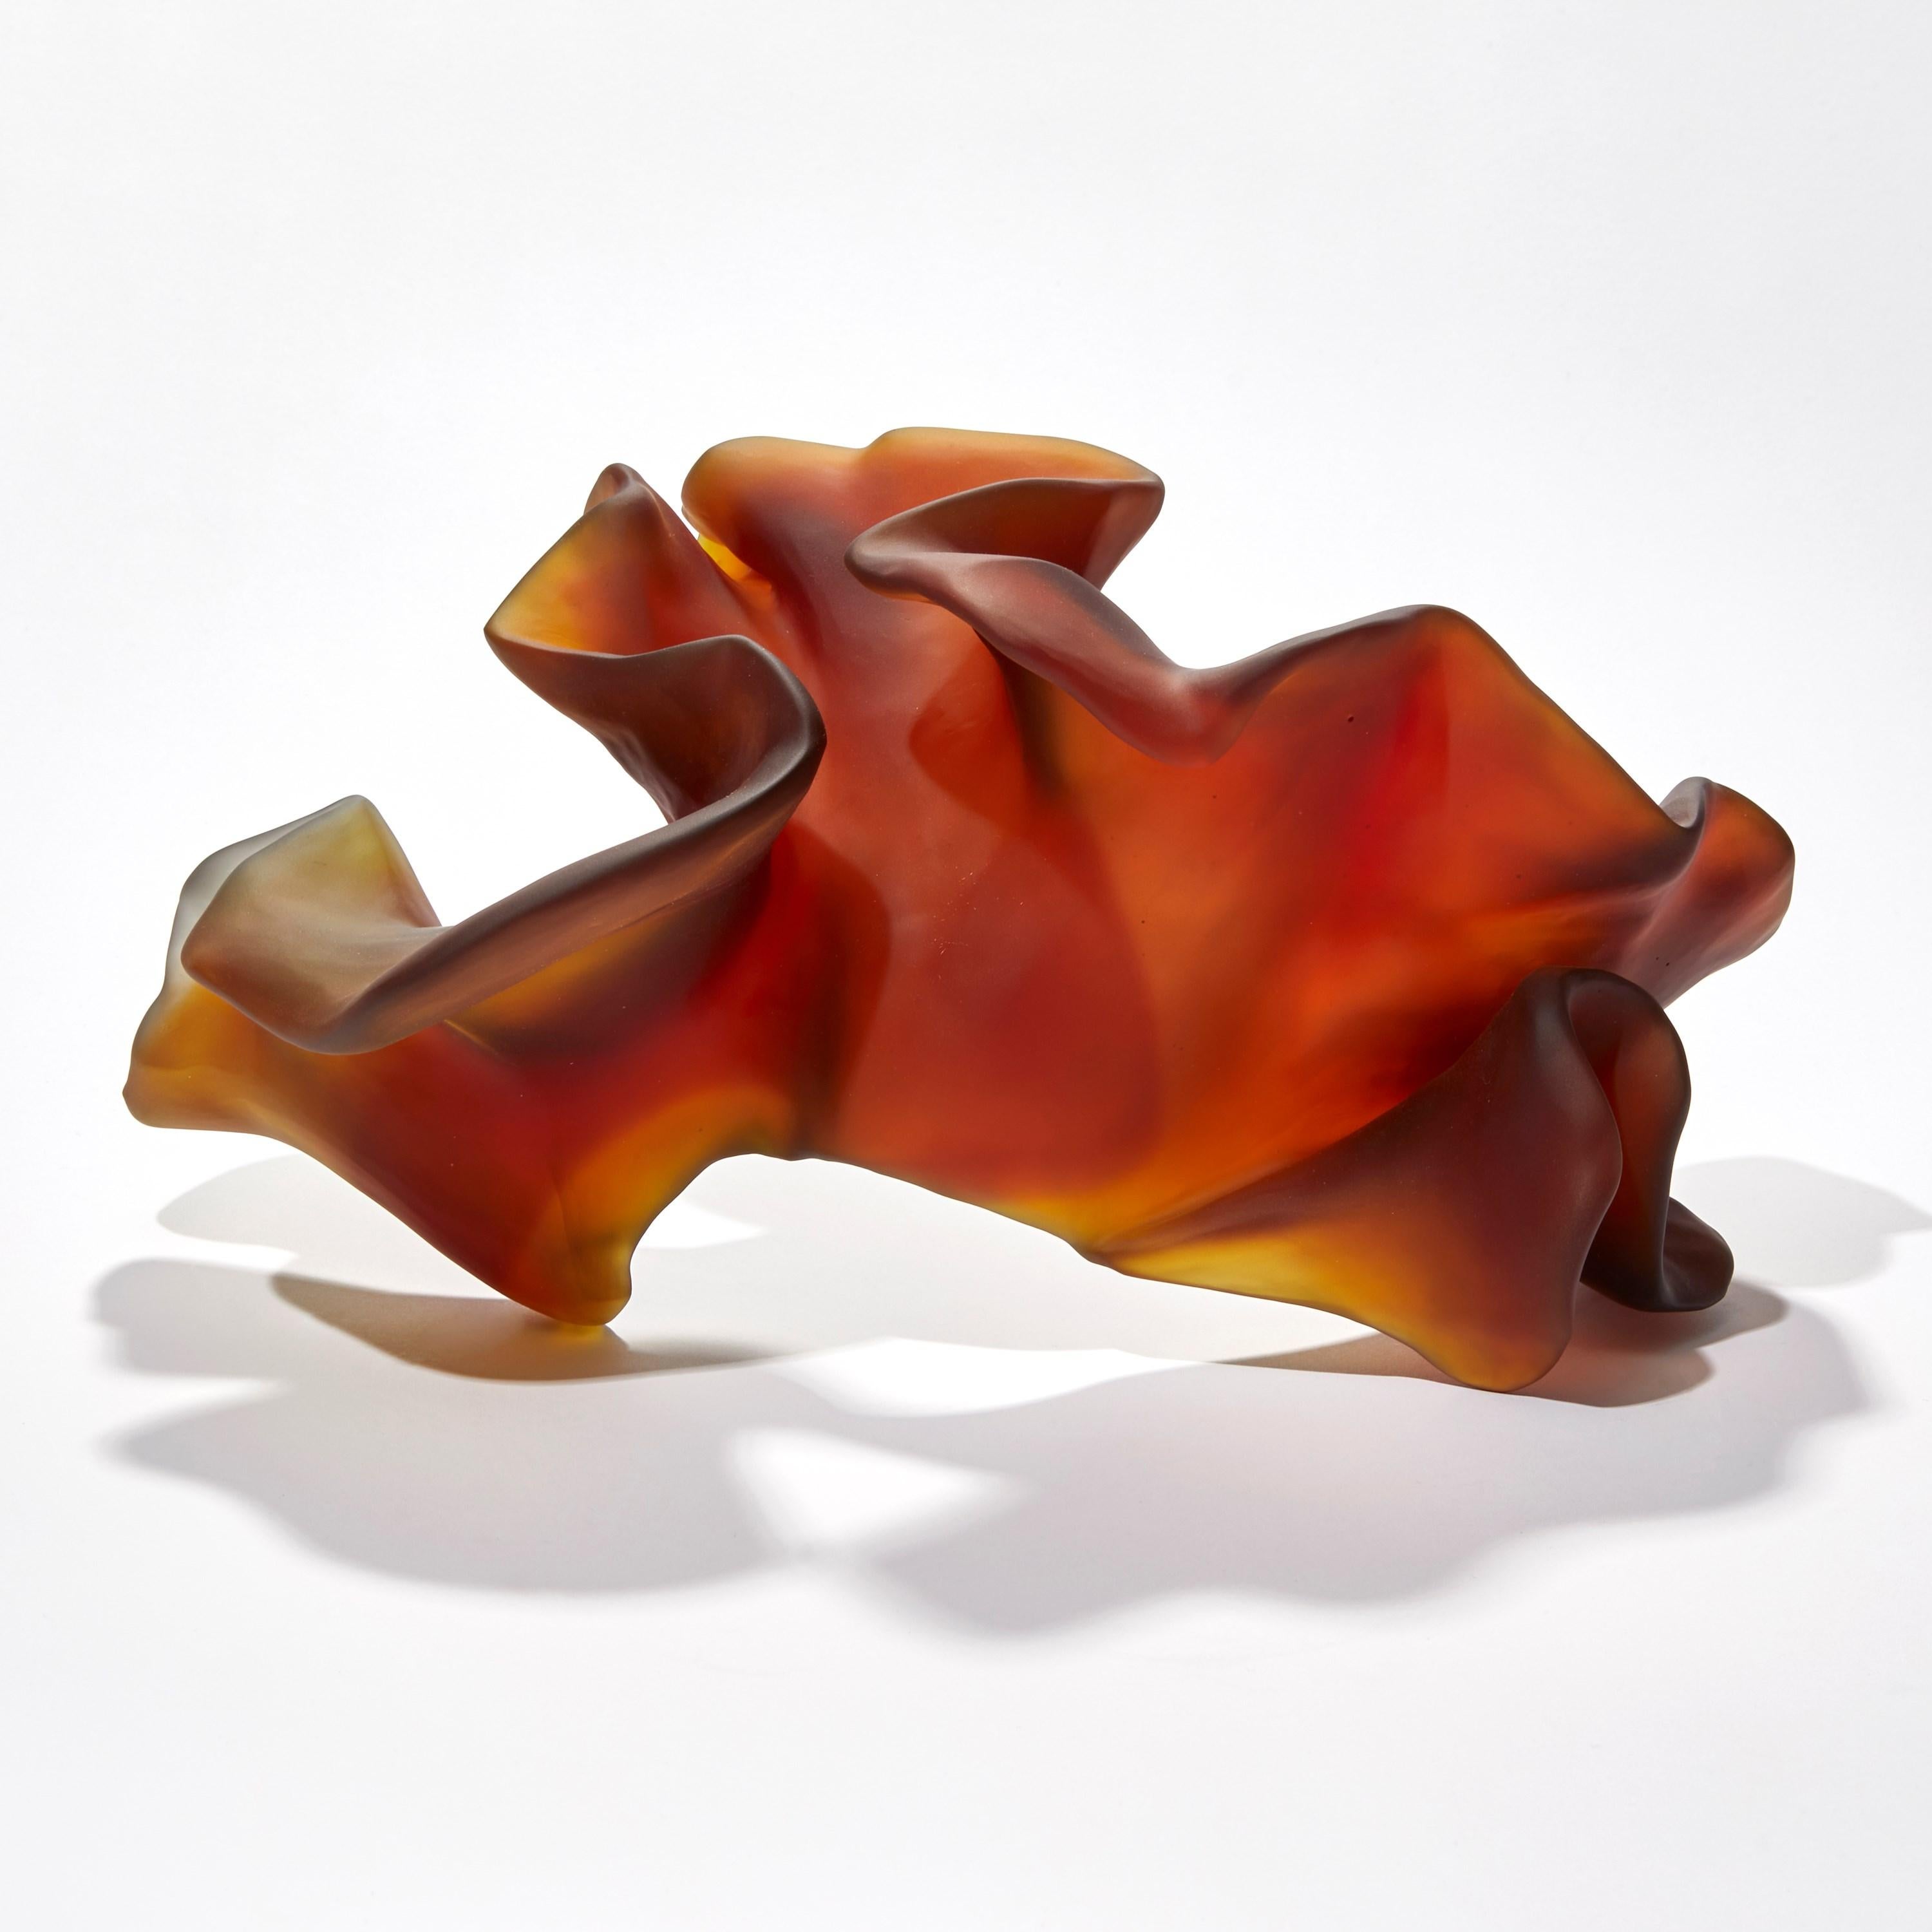 'Cascade' is a unique cast glass sculpture by the Danish artist, Monette Larsen.

Larsen has always been fascinated by the concept of beauty within nature; what makes something beautiful and the characteristics that define it as such. Her work